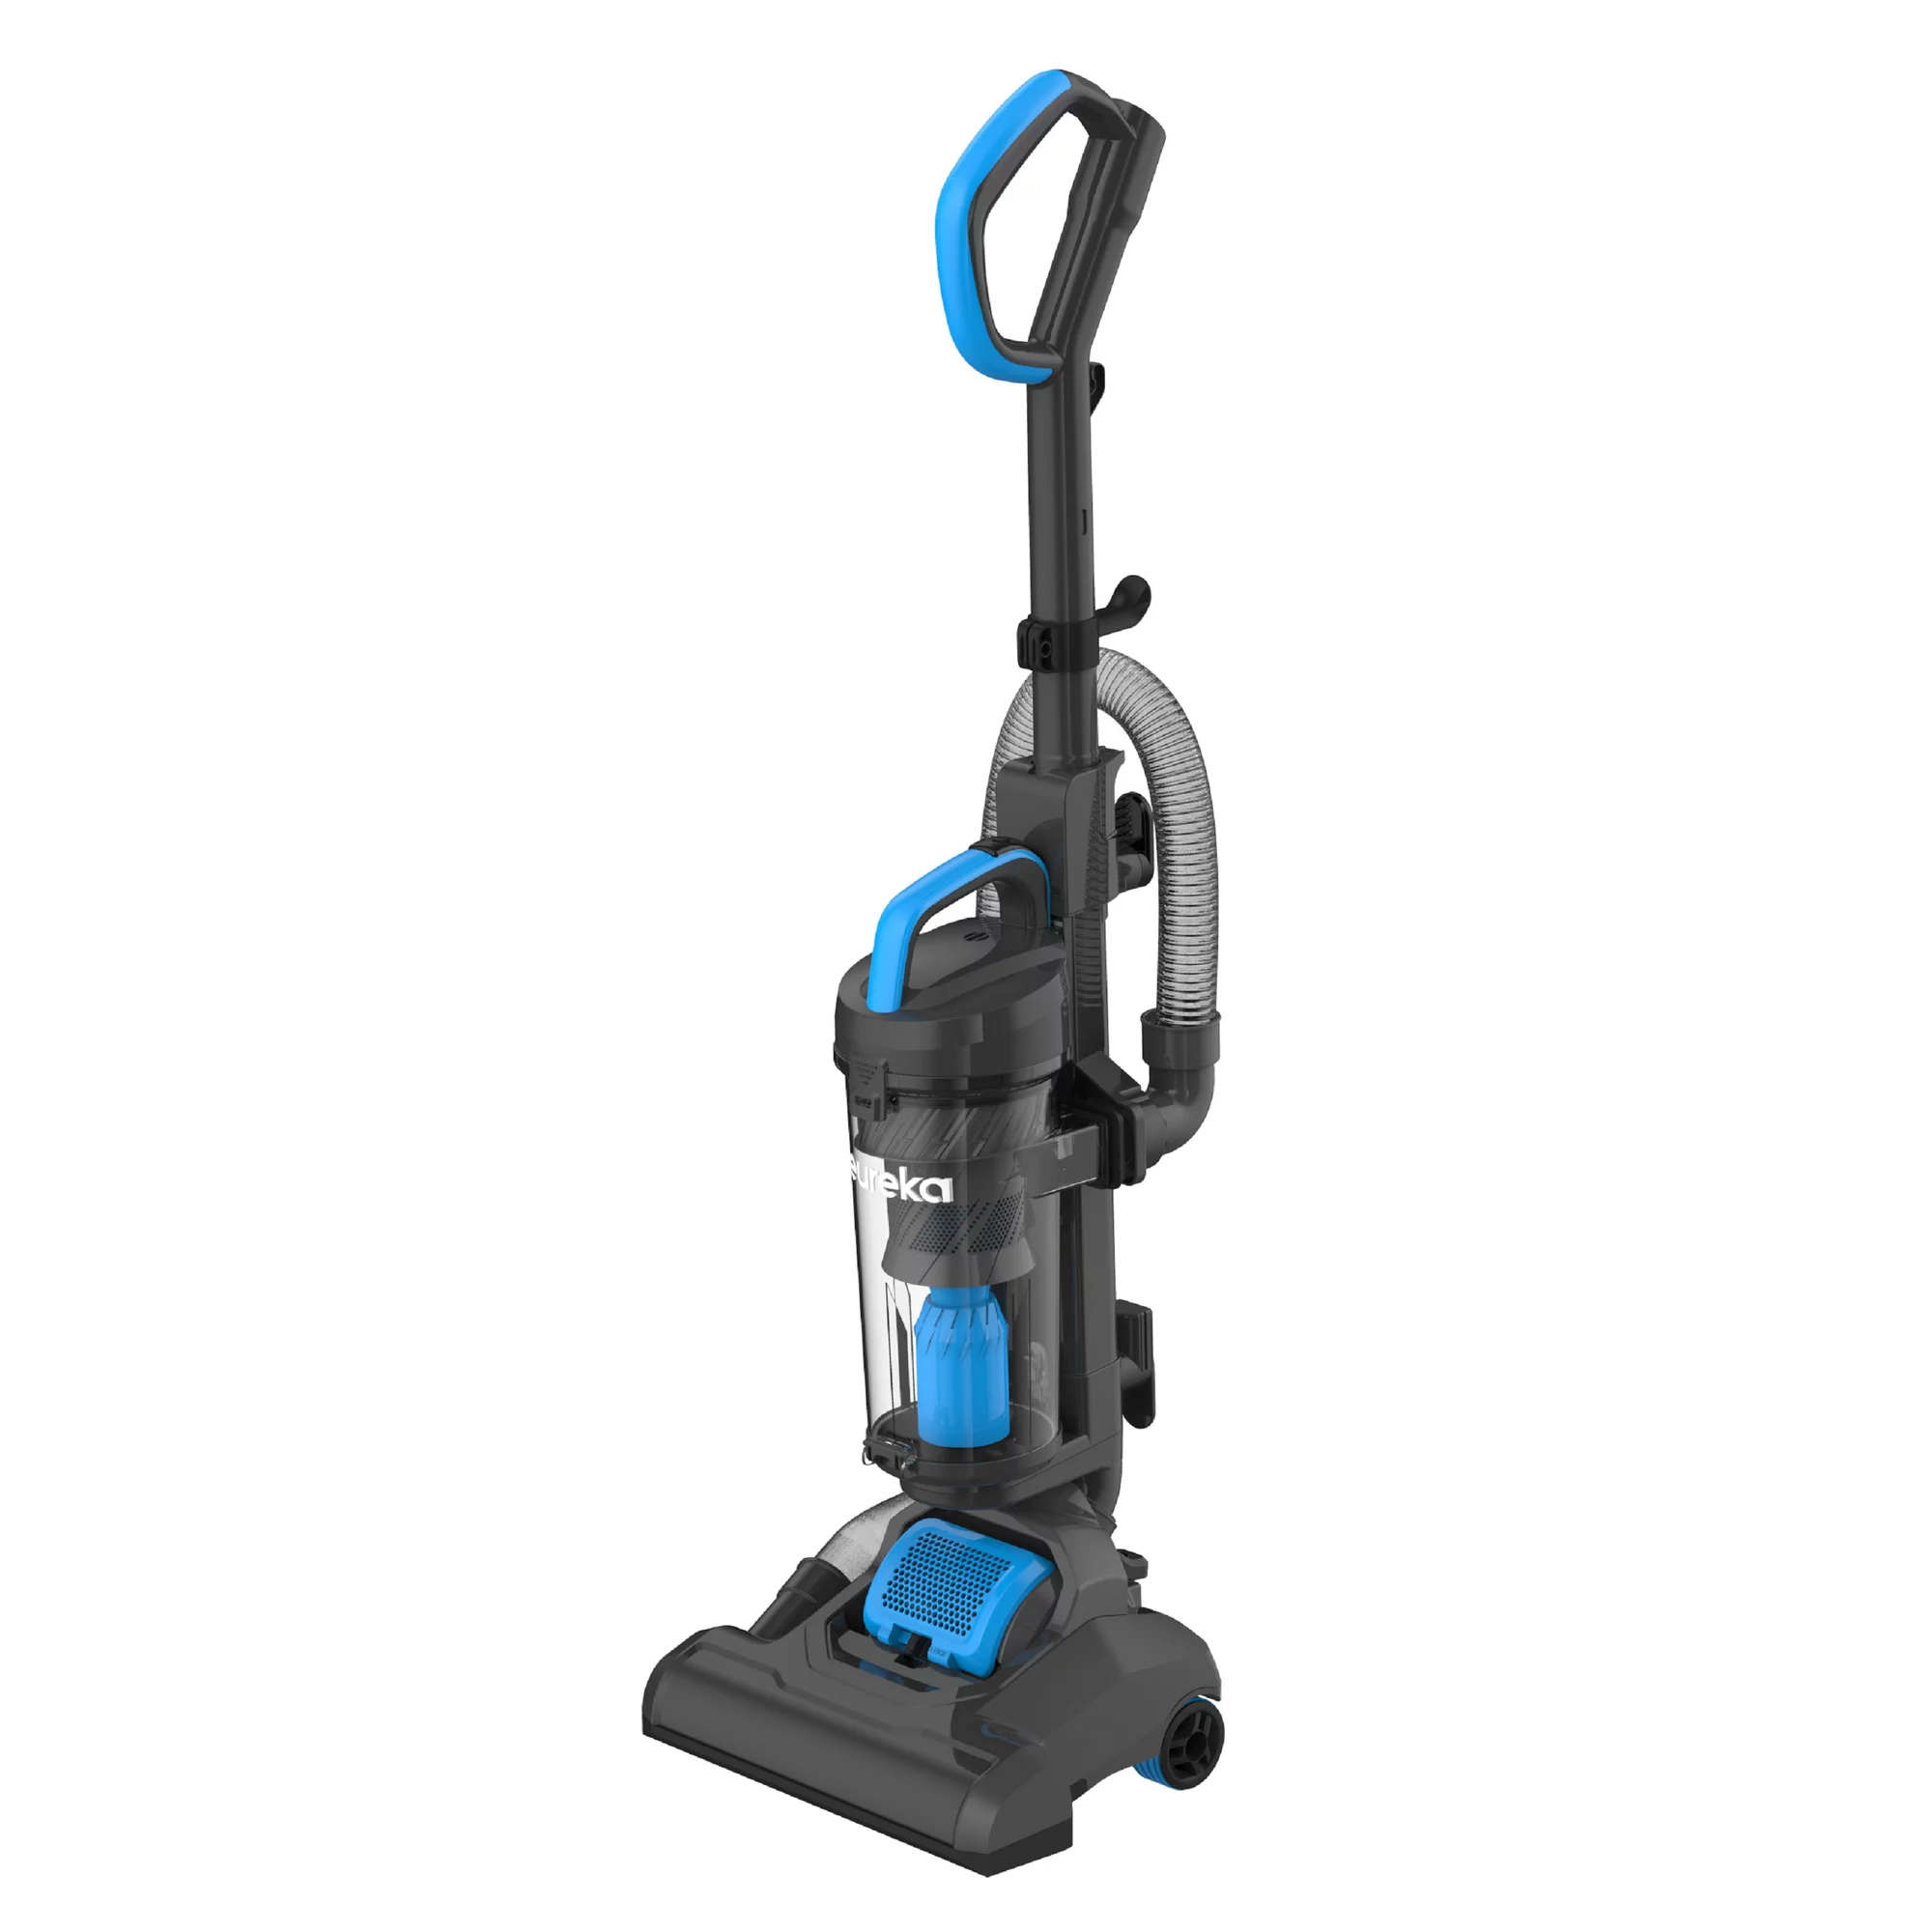 Eureka Max Swivel Deluxe Upright Multi-Surface Vacuum with No Loss of Suction & Swivel Steering, NEU250 - image 2 of 7